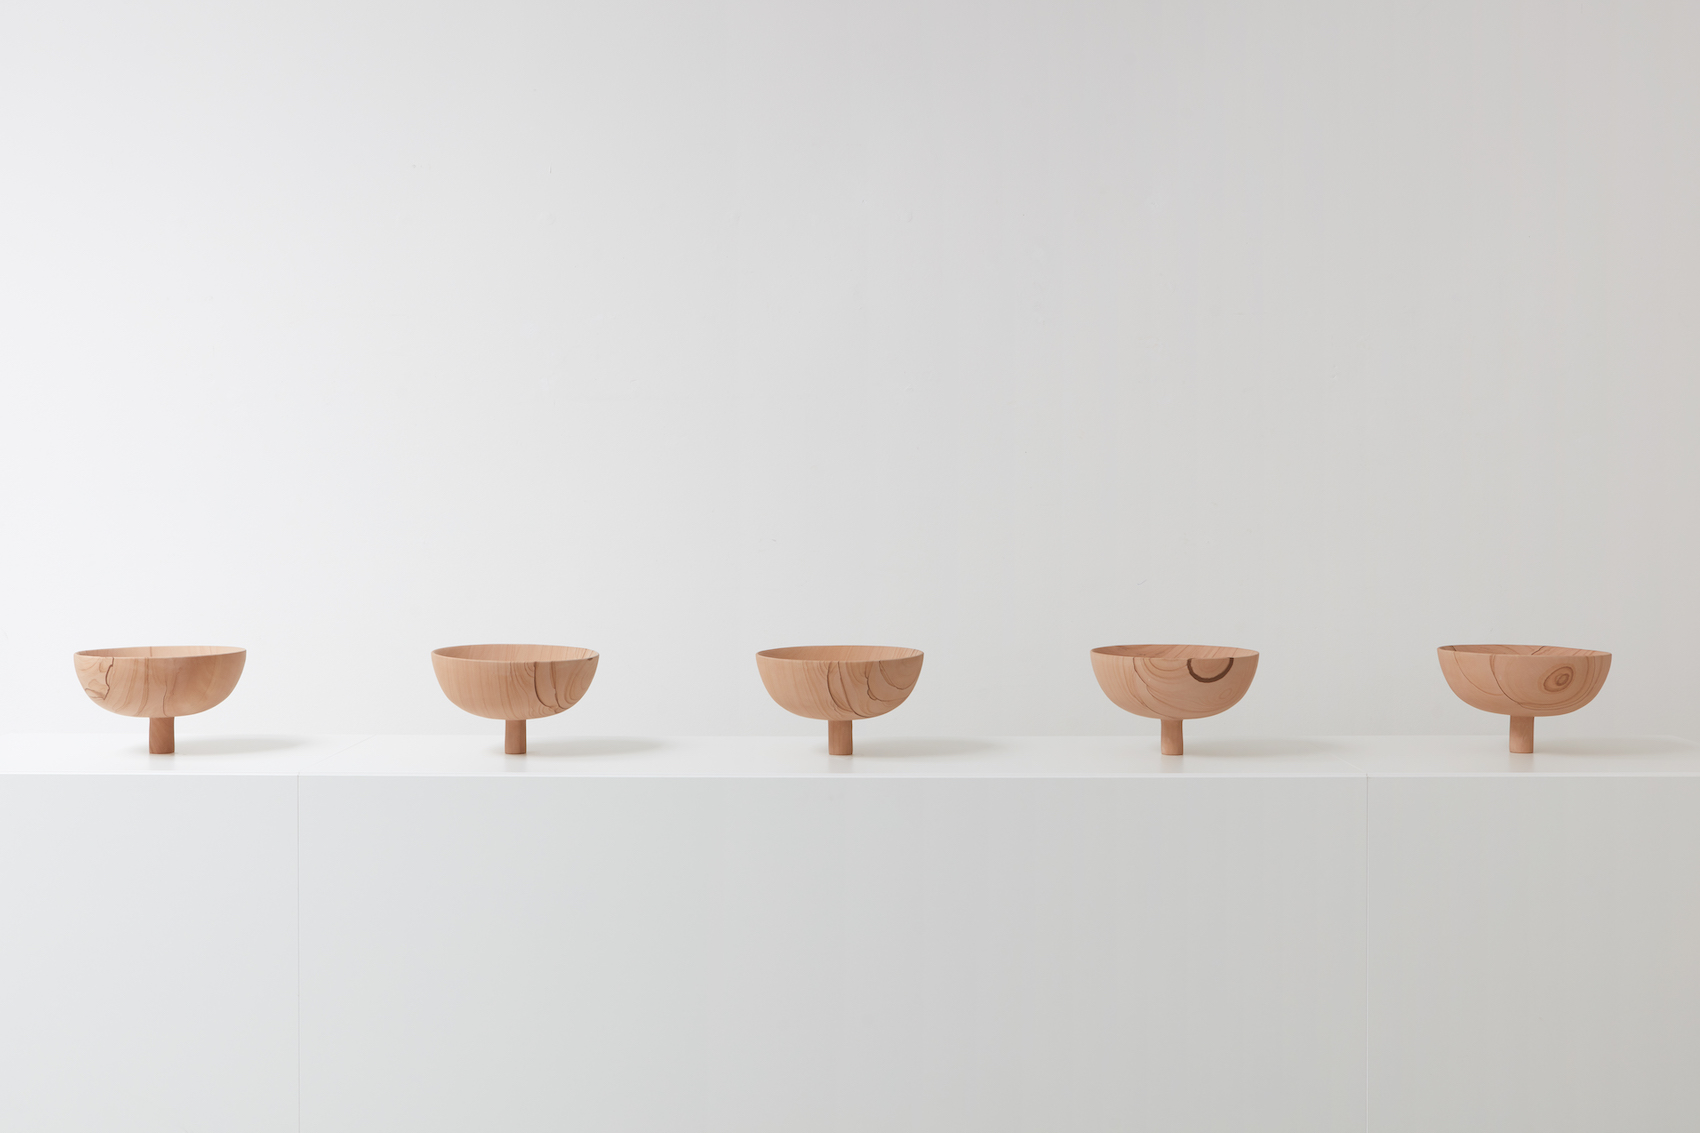 Minimalist Collection of Objects and Pieces "Desert Collection" by Hagit Pincovici